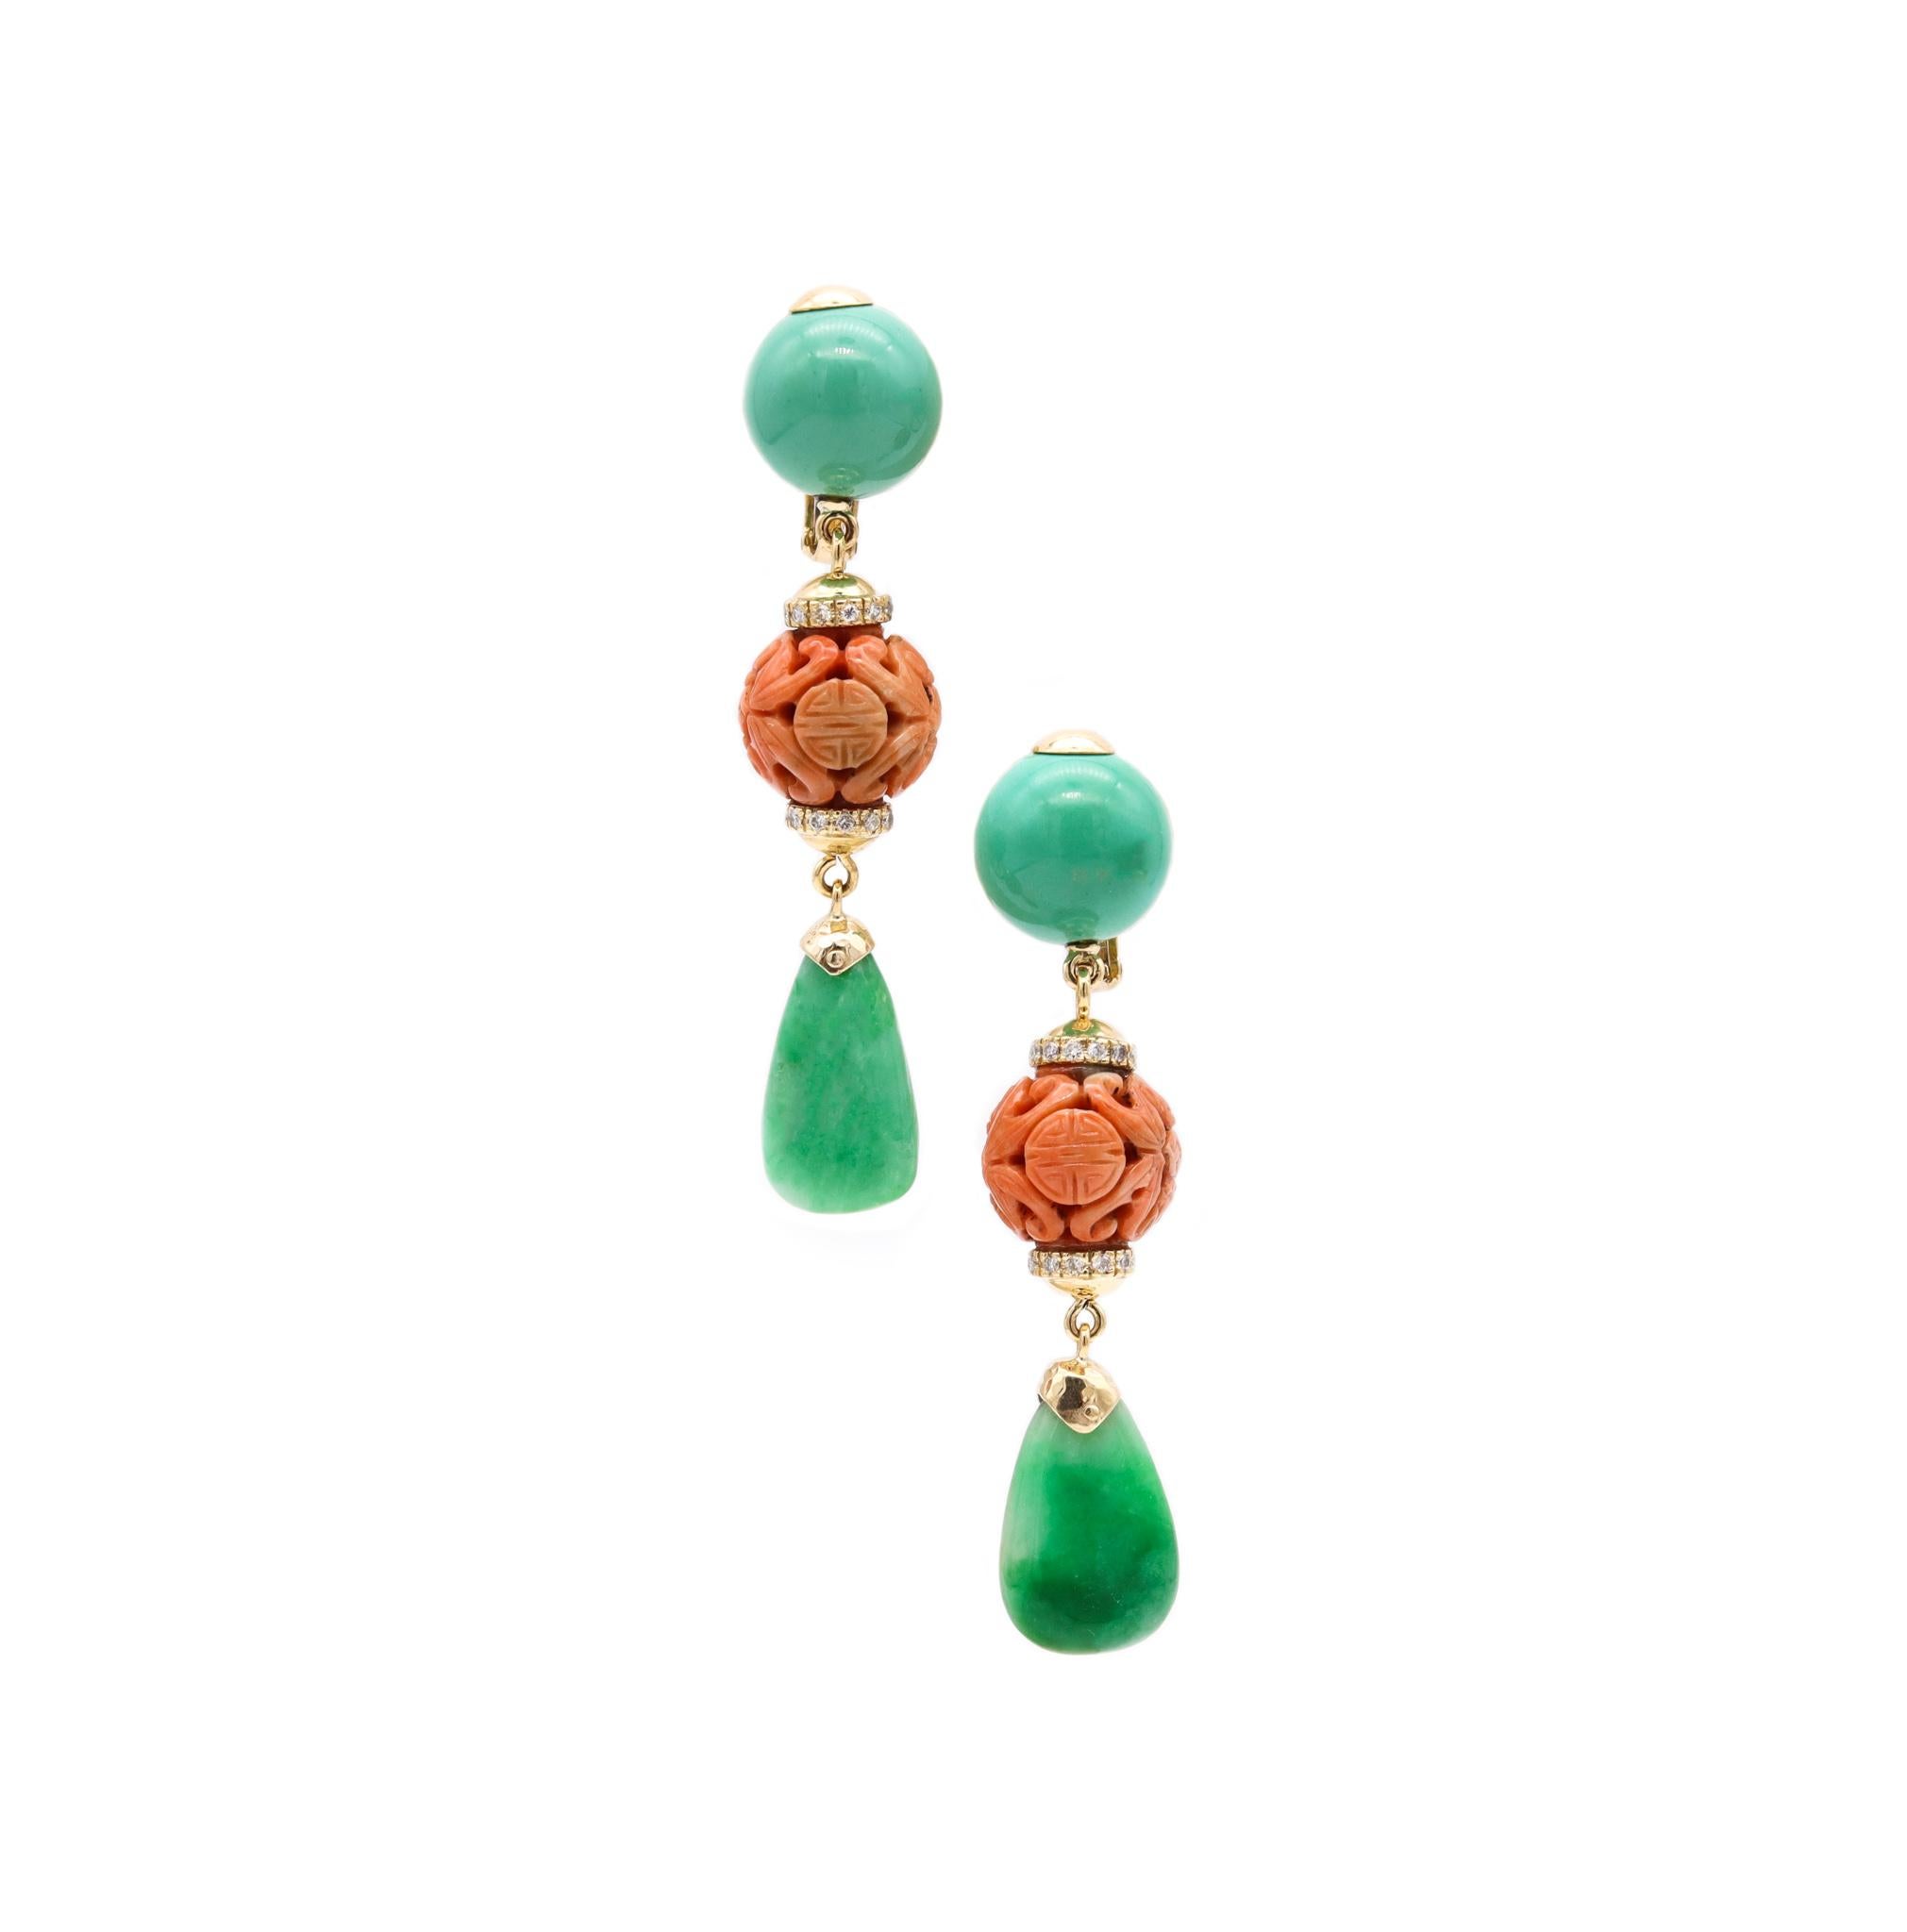 David Webb 1950 New York Chinoiserie Drop Earrings in 18Kt Gold with Gemstones 1